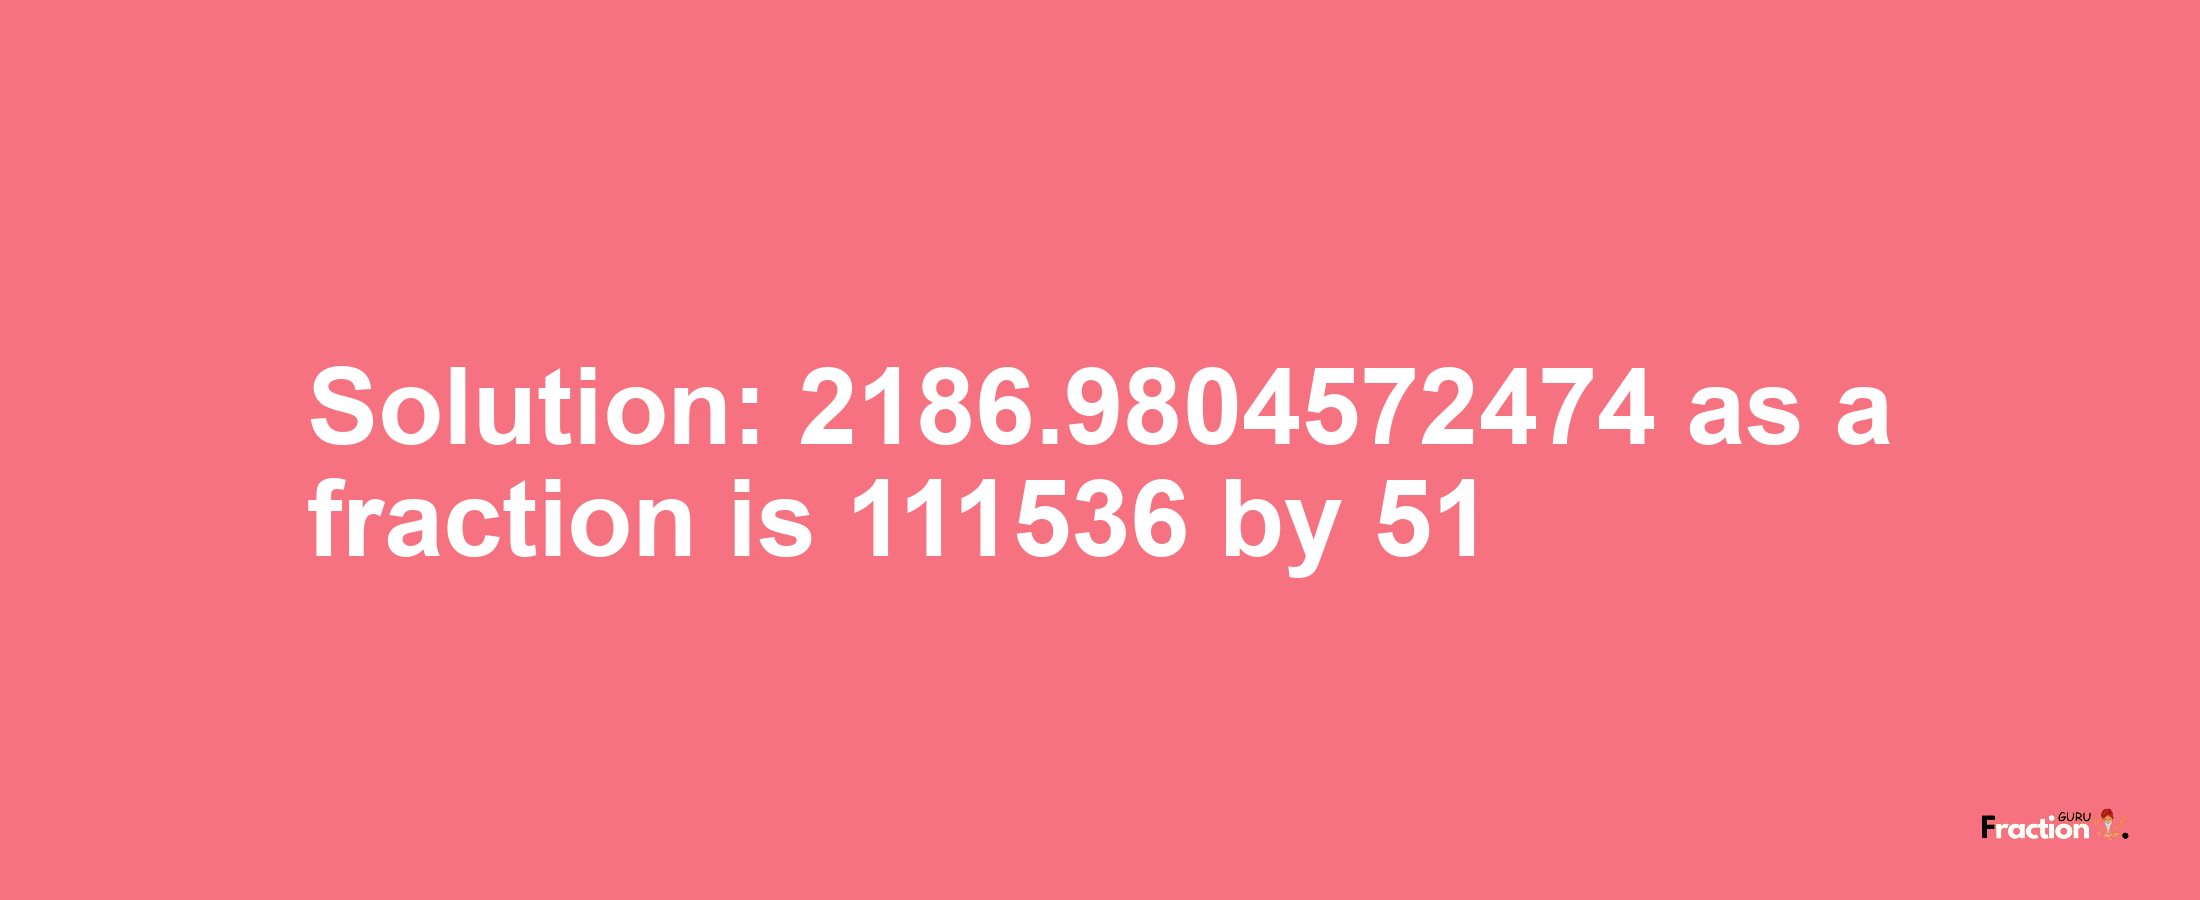 Solution:2186.9804572474 as a fraction is 111536/51